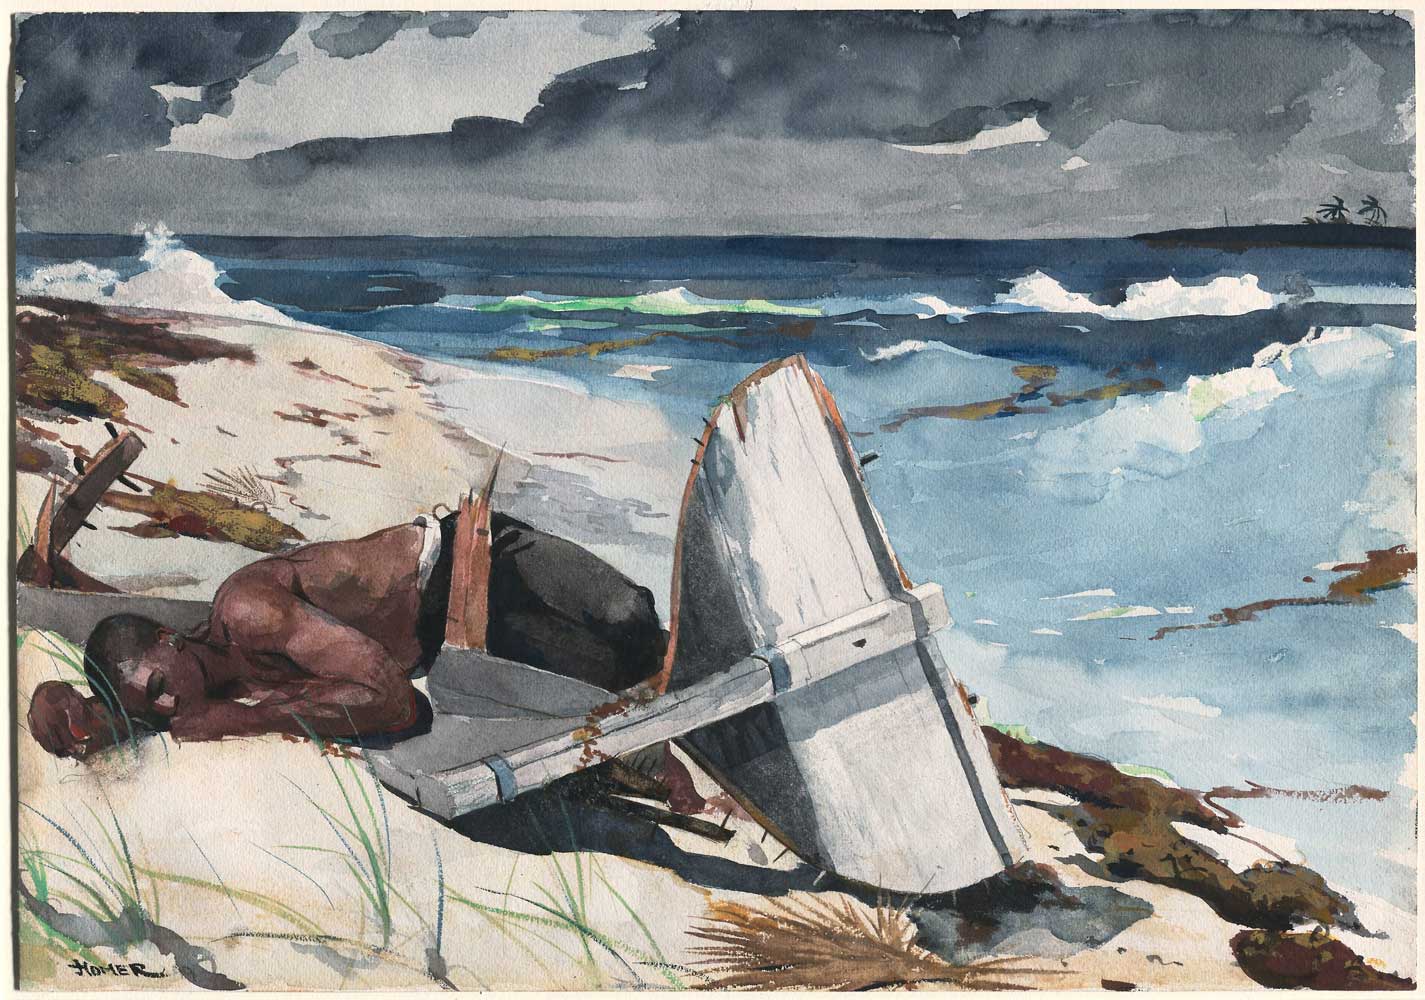 After the Hurricane, Bahamas by Winslow Homer